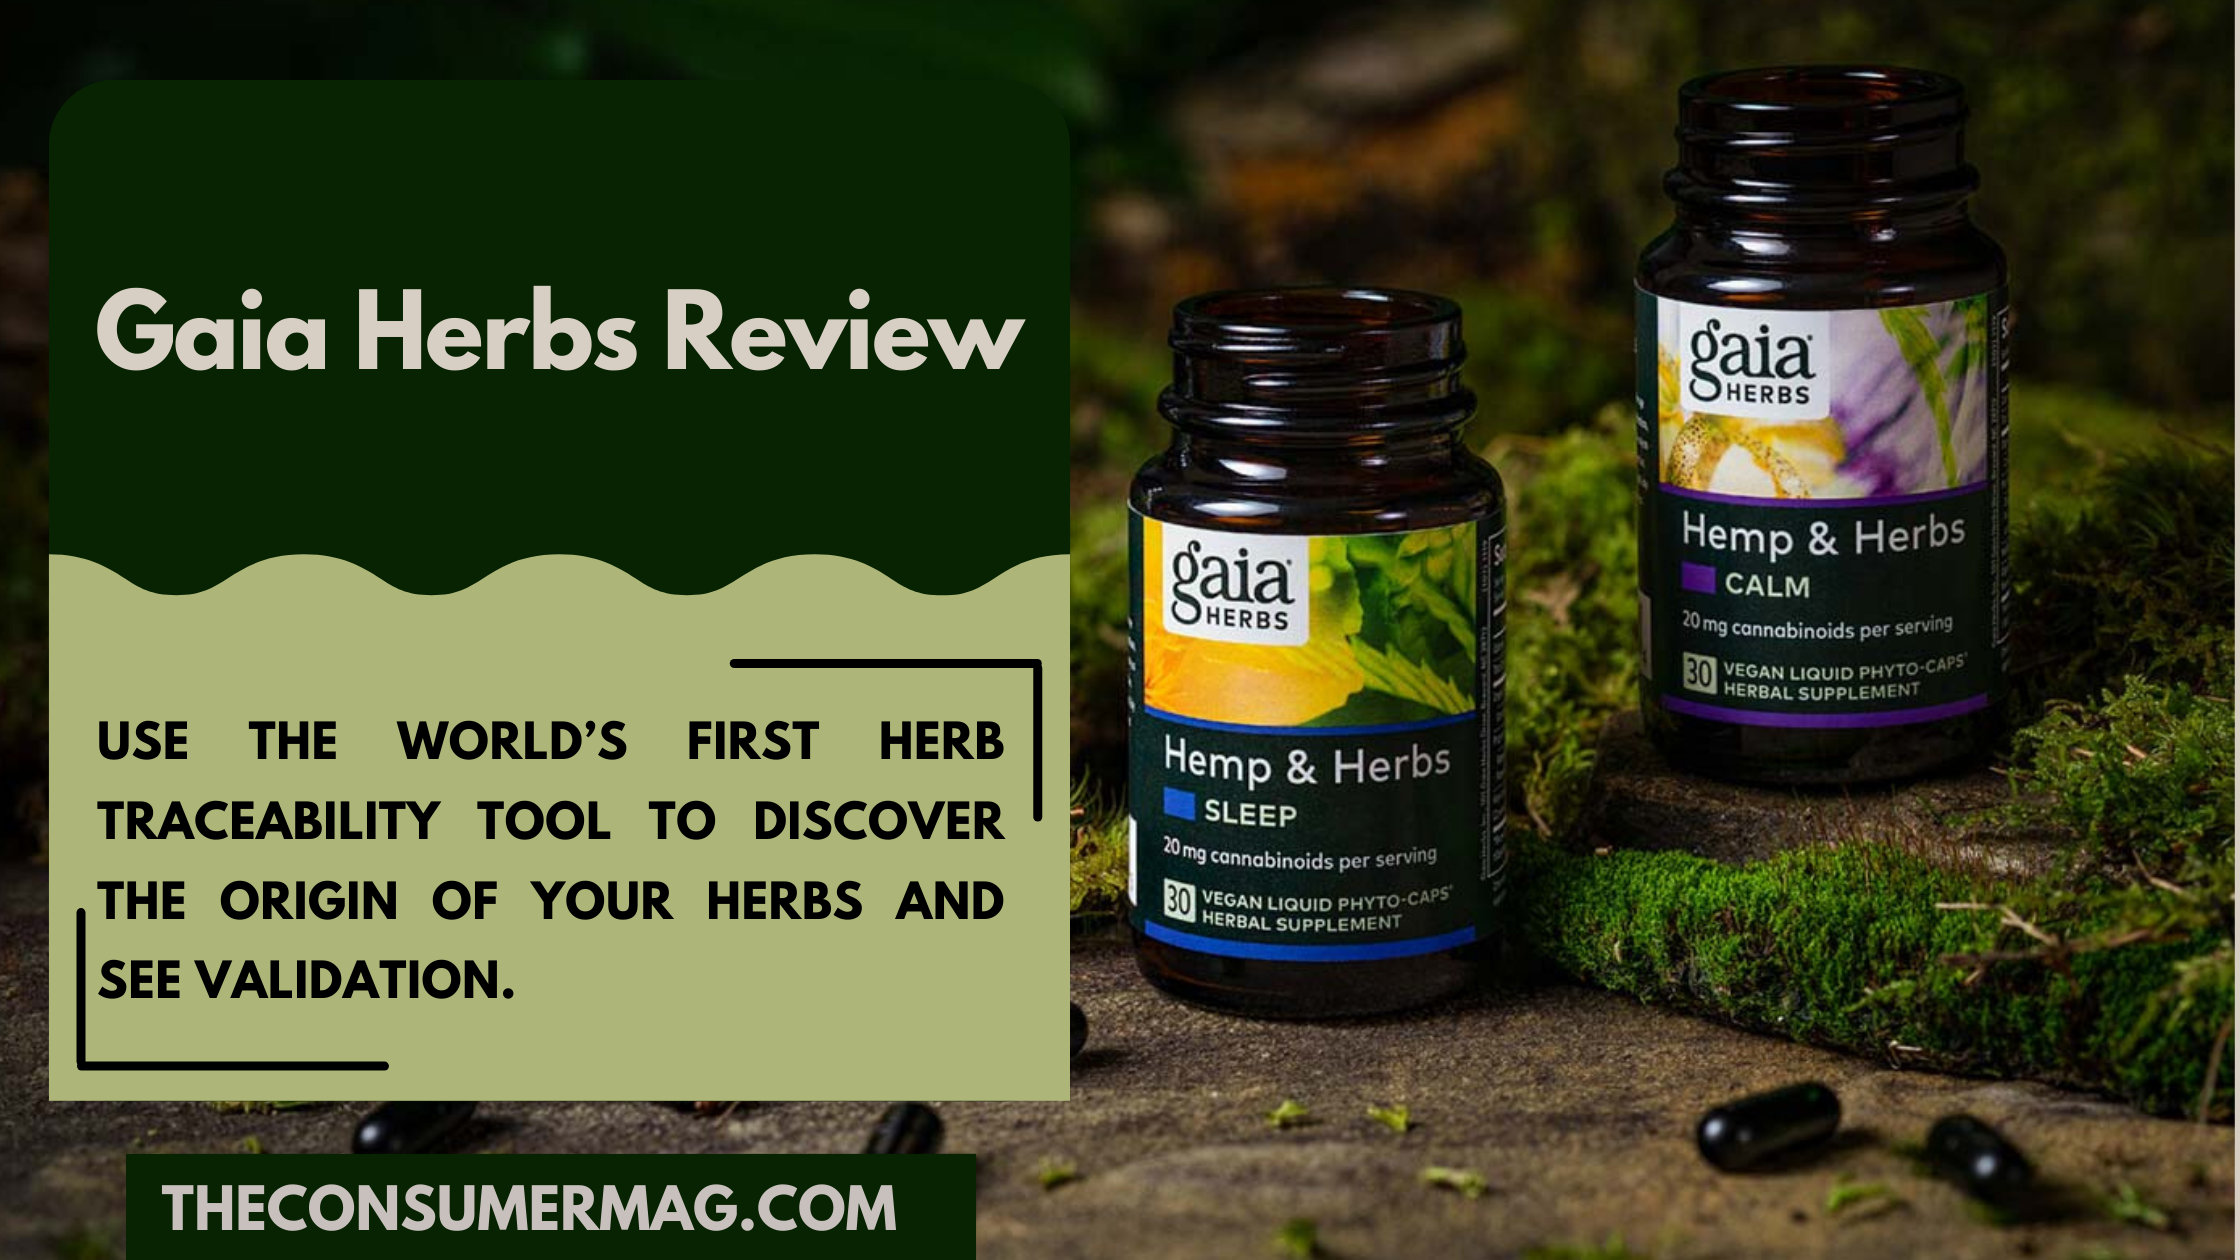 Gaia herbs featured image